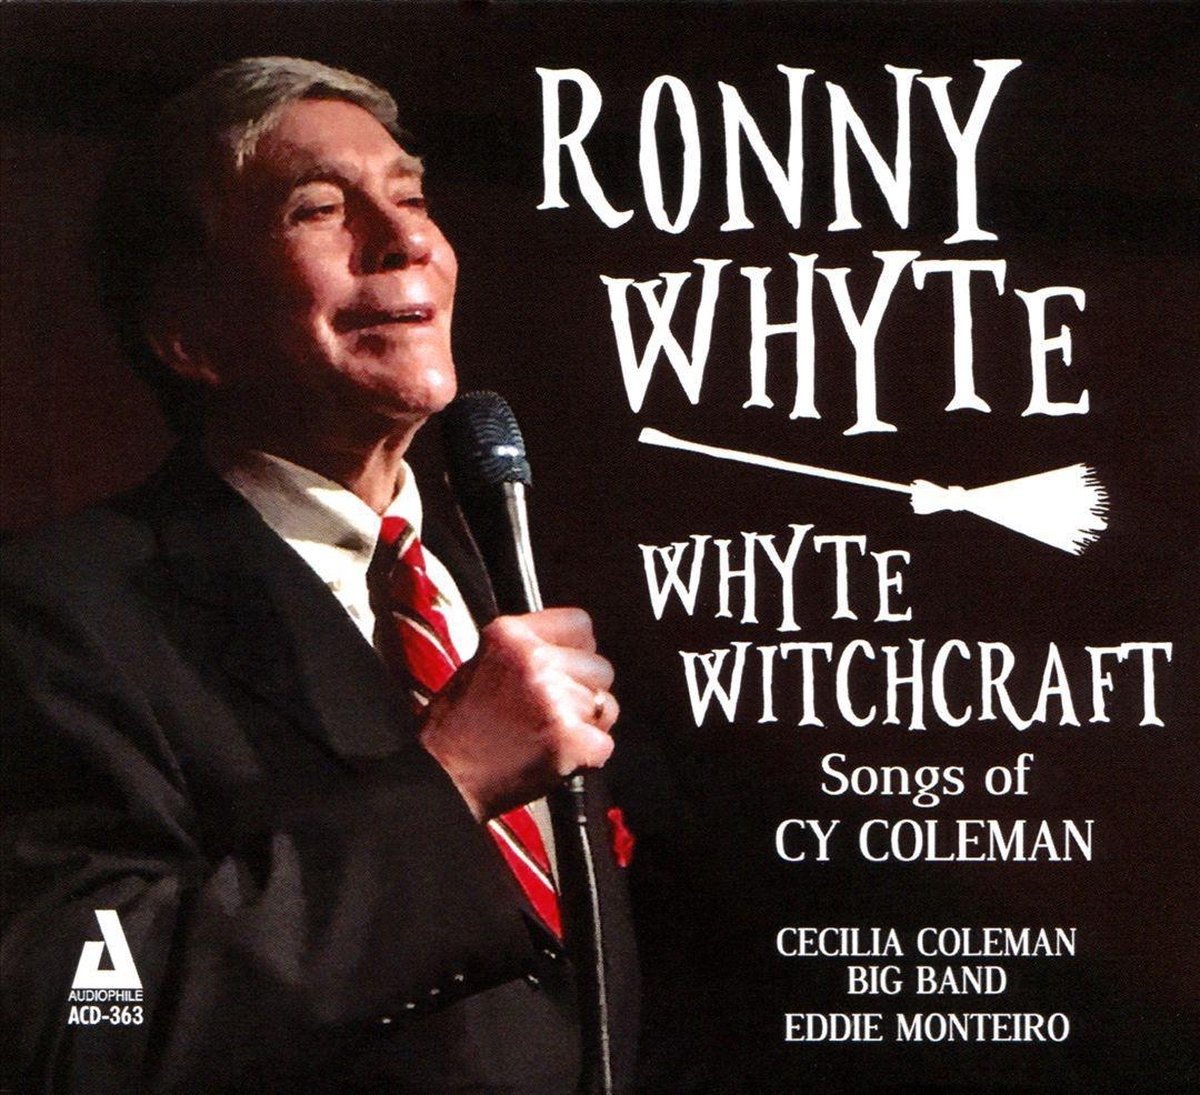 CD Shop - WHYTE, RONNY WHYTE WITCHCRAFT - SONGS OF CY COLEMAN